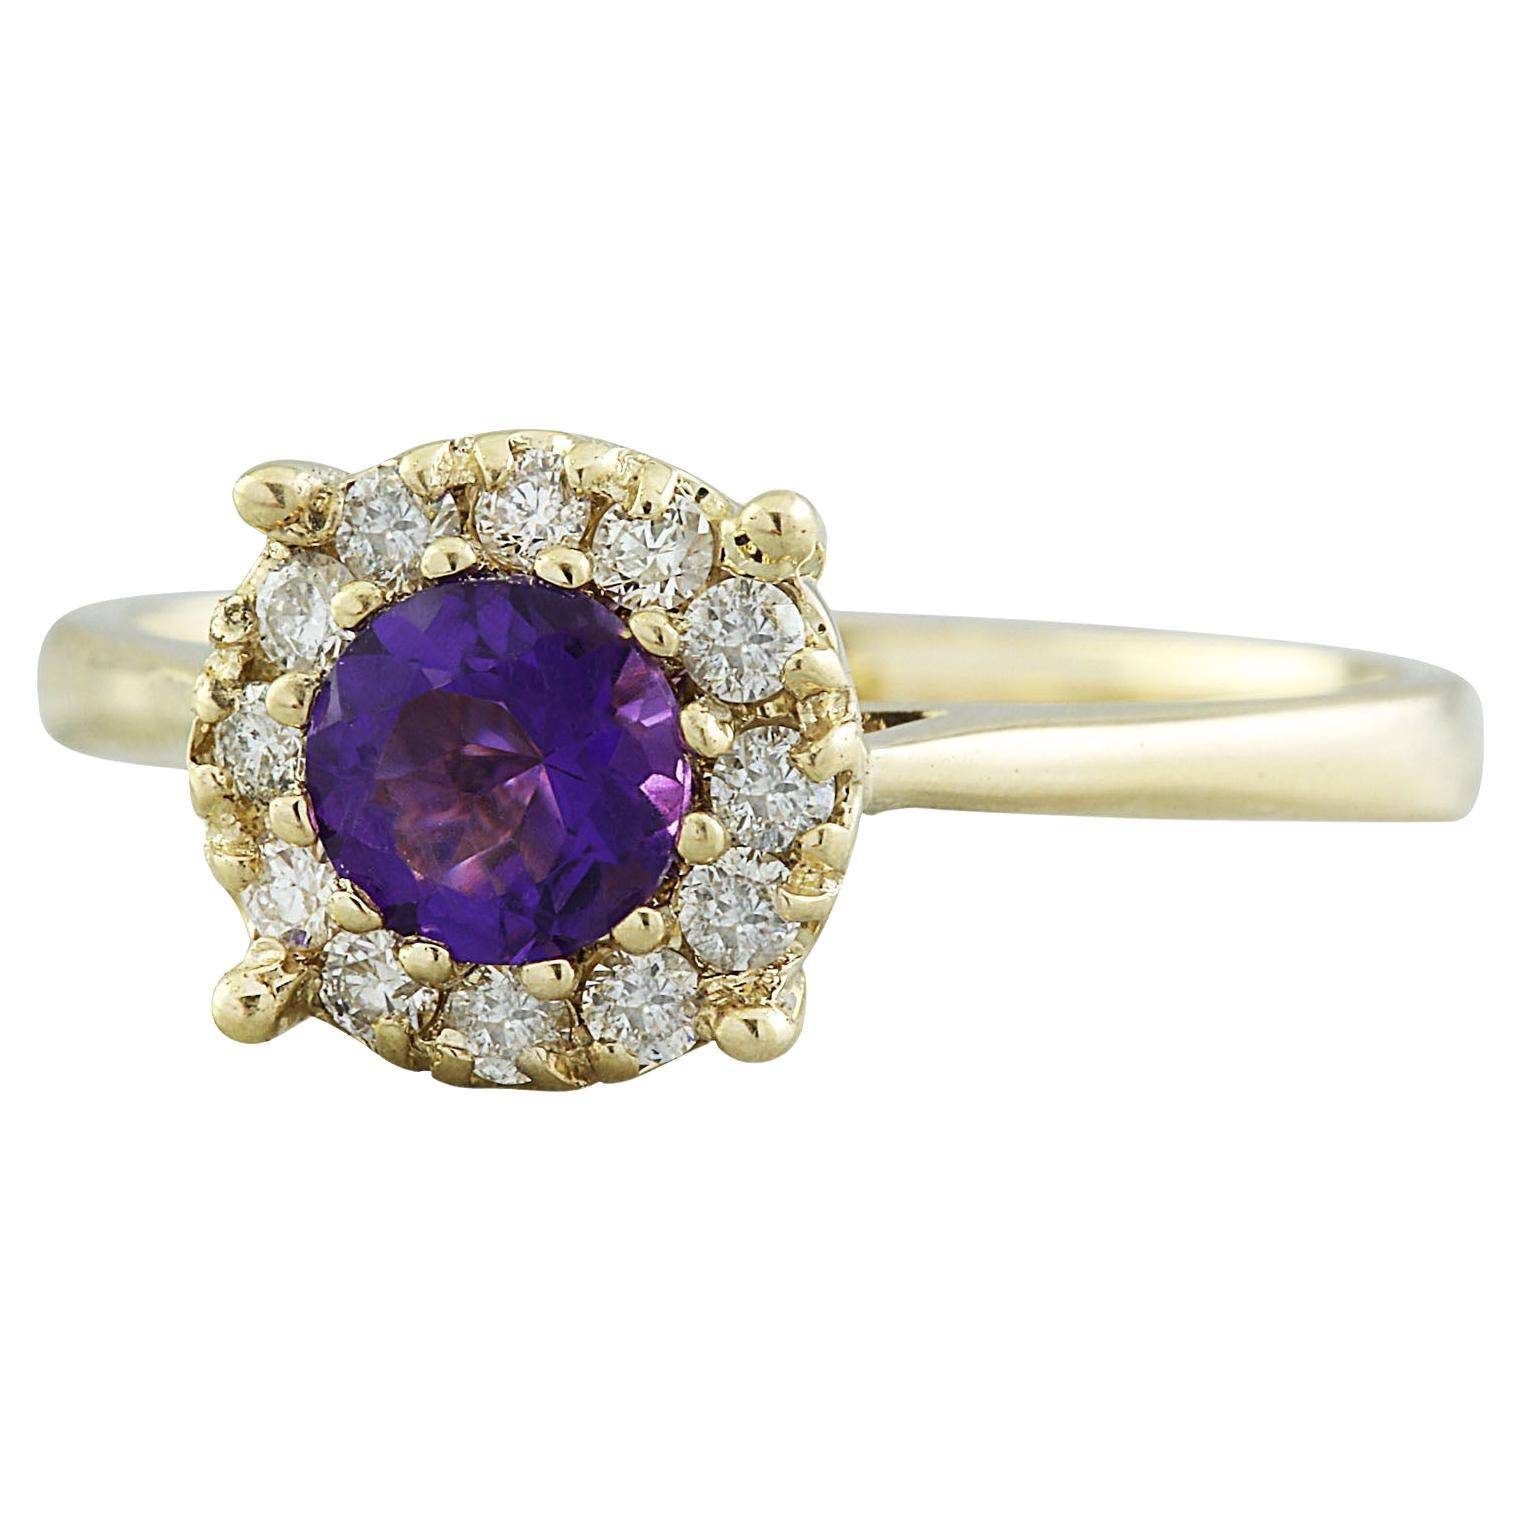 0.72 Carat Natural Amethyst 14 Karat Solid Yellow Gold Diamond Ring
Stamped: 14K 
Total Ring Weight: 2.9 Grams
Amethyst Weight: 0.50 Carat (5.00x5.00 Millimeters)  
Diamond Weight: 0.22 carat (F-G Color, VS2-SI1 Clarity )
Quantity: 12
Face Measures: